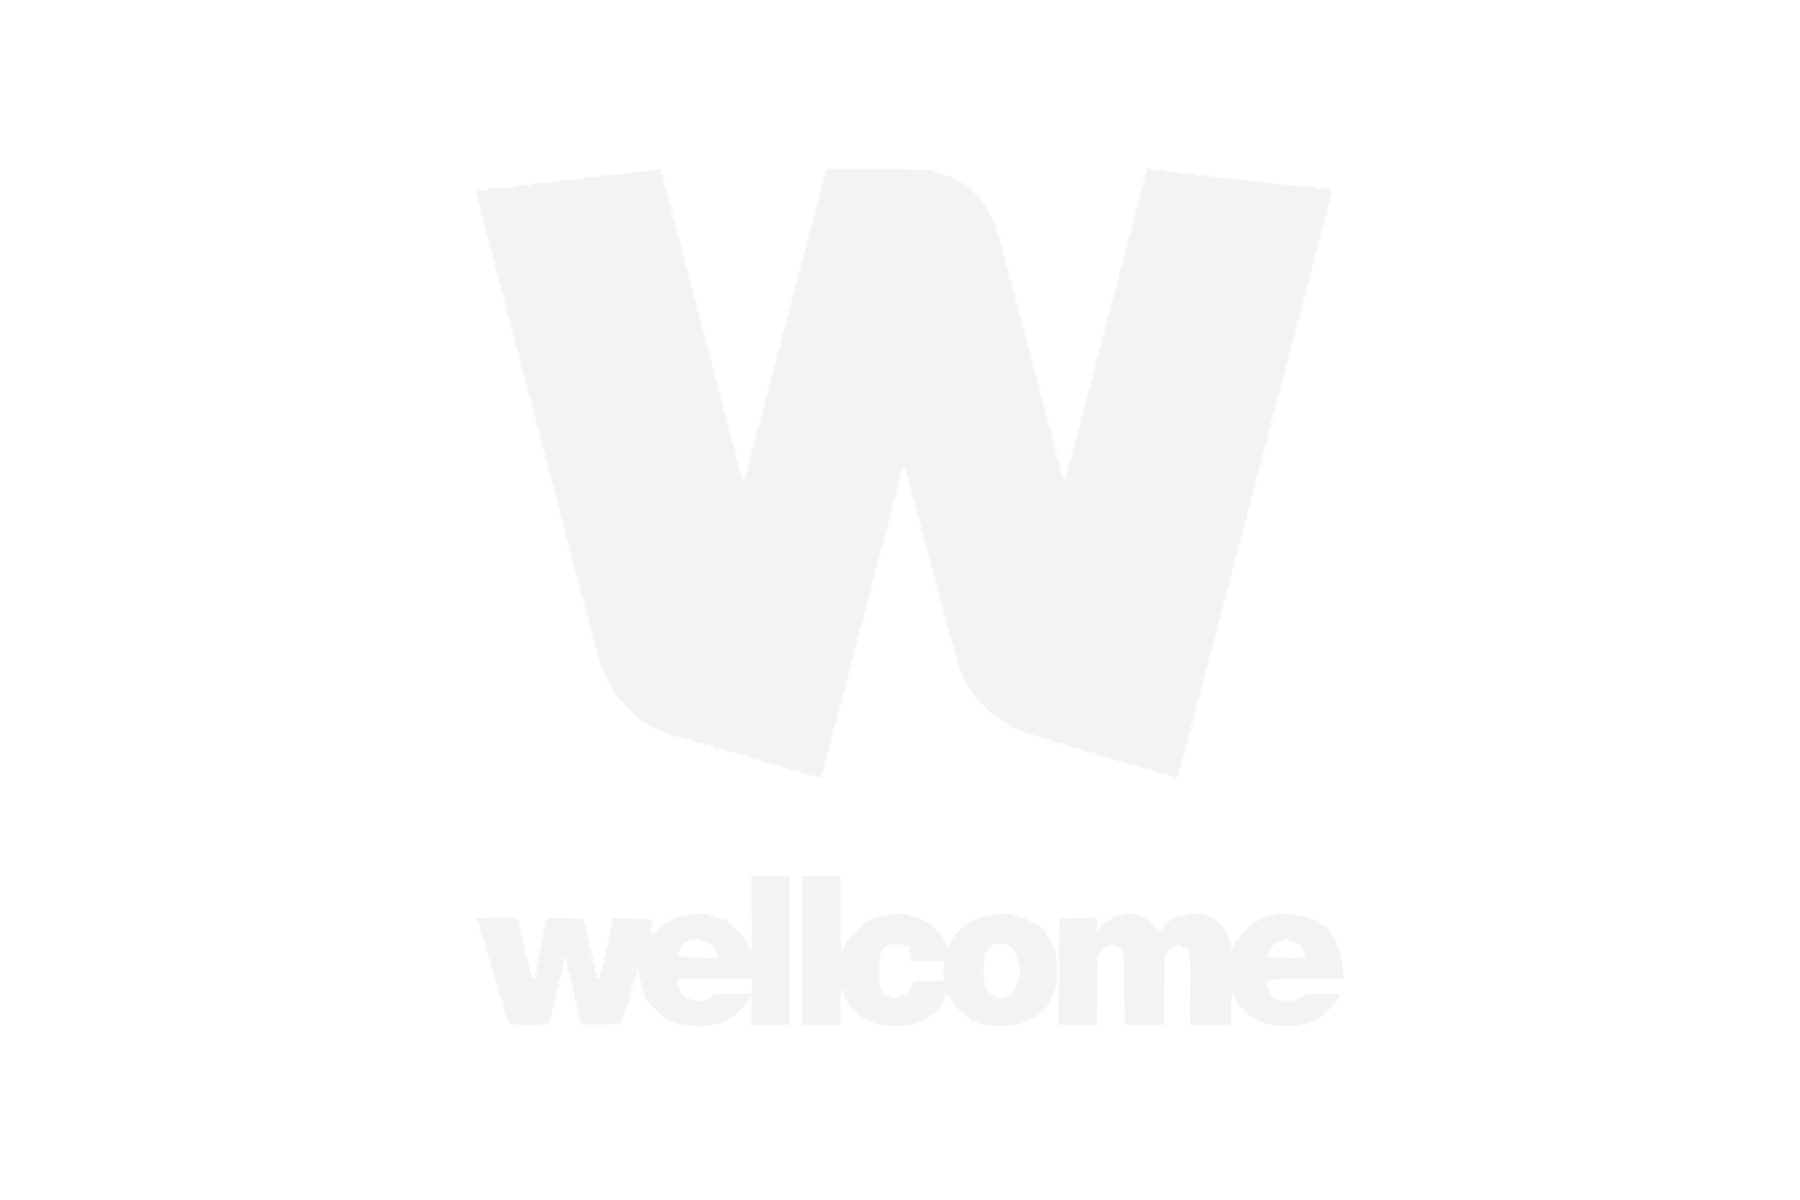 wellcome.png